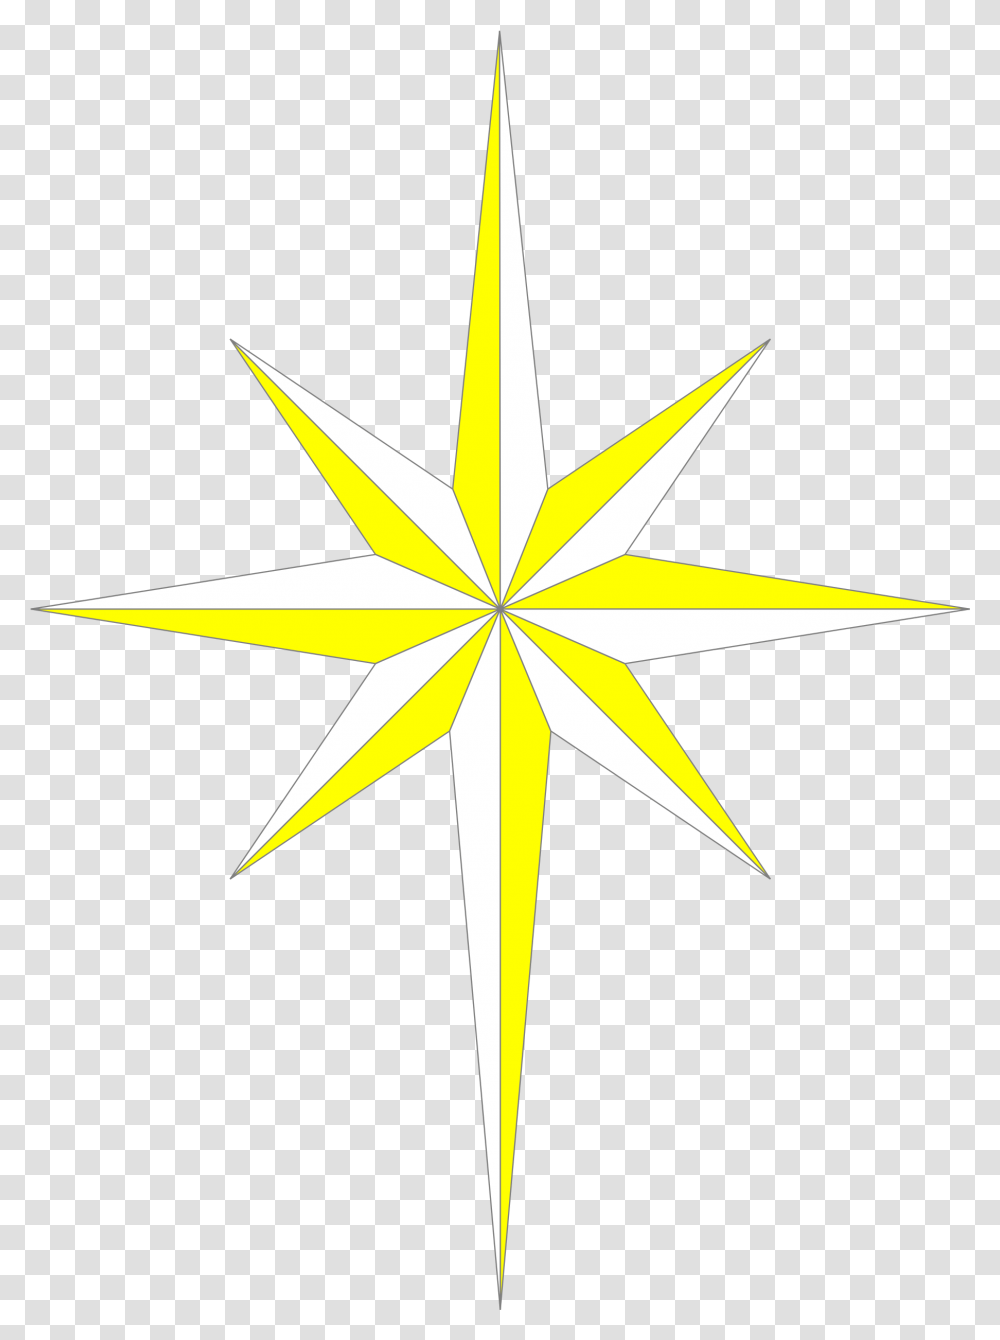 File Bethlehemstar Svg Wikimedia Commons Clipart Global Positioning Systems Directorate, Cross, Star Symbol Transparent Png